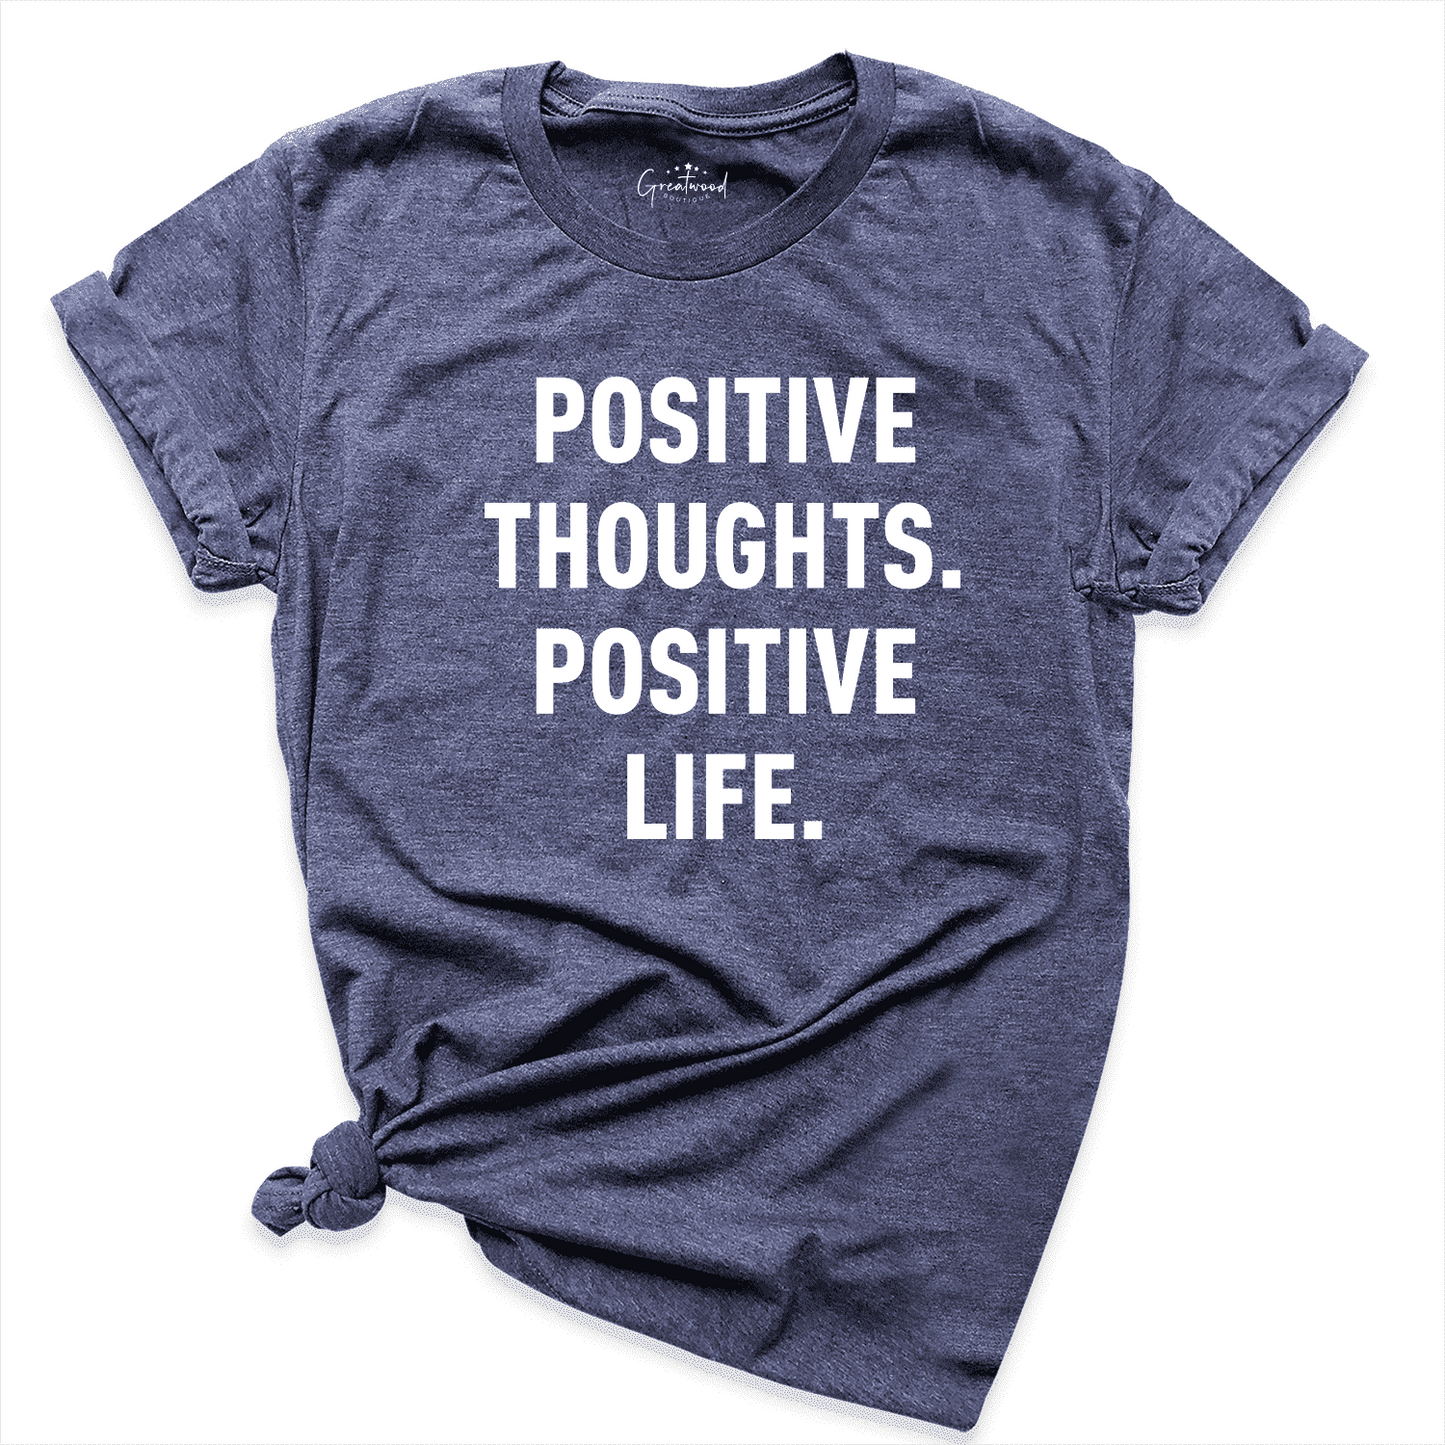 Positive Thoughts Positive Life Shirt Navy - Greatwood Boutique